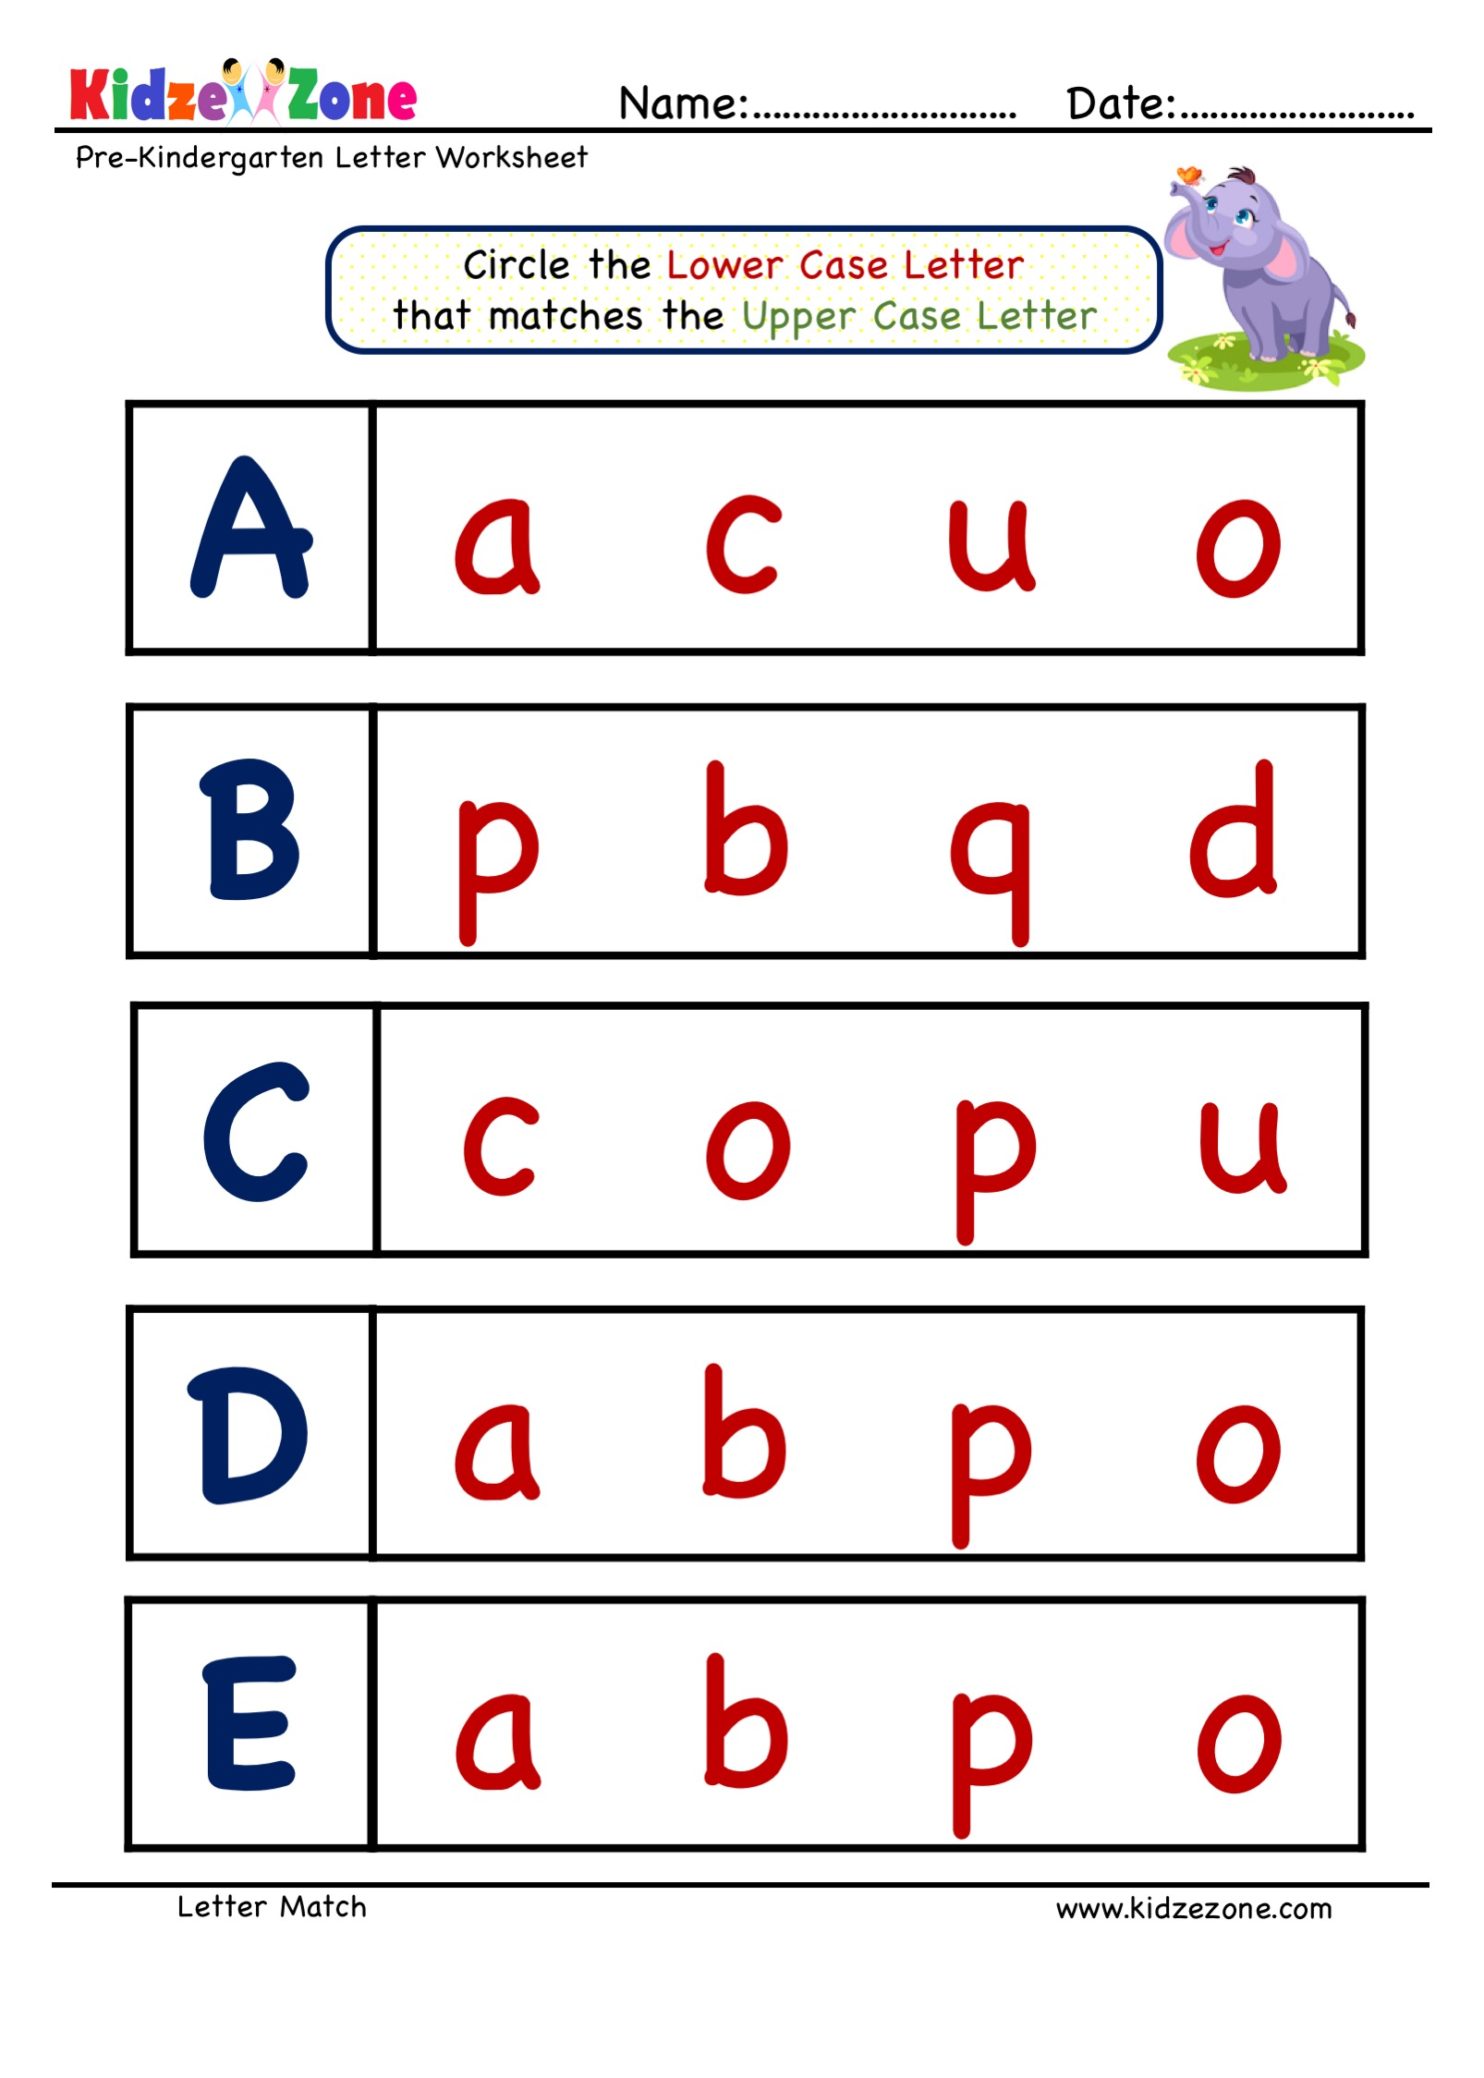 preschool-letter-matching-upper-case-to-lower-case-a-to-e